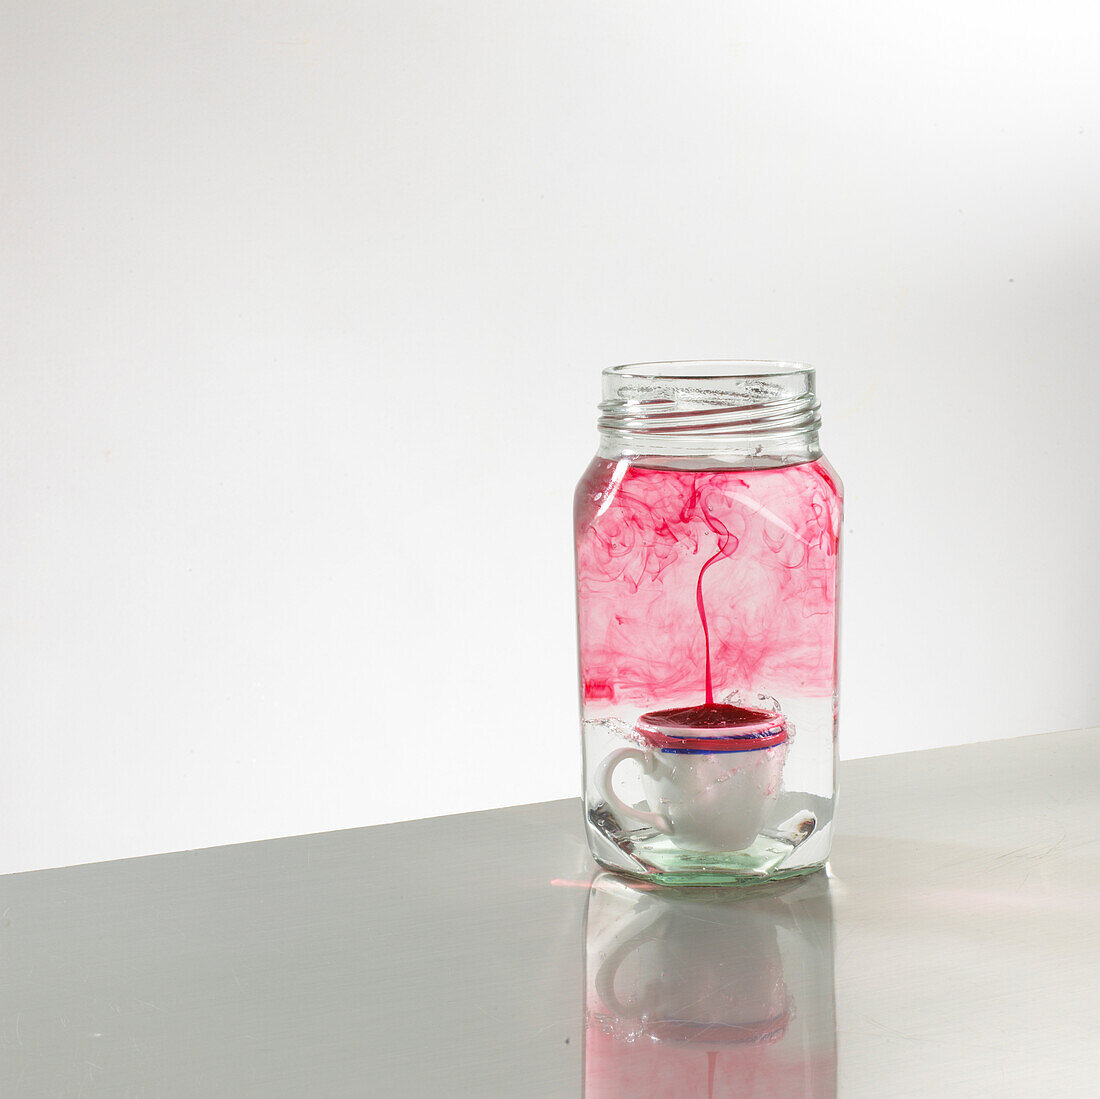 Coffee cup inside glass jar containing cold water